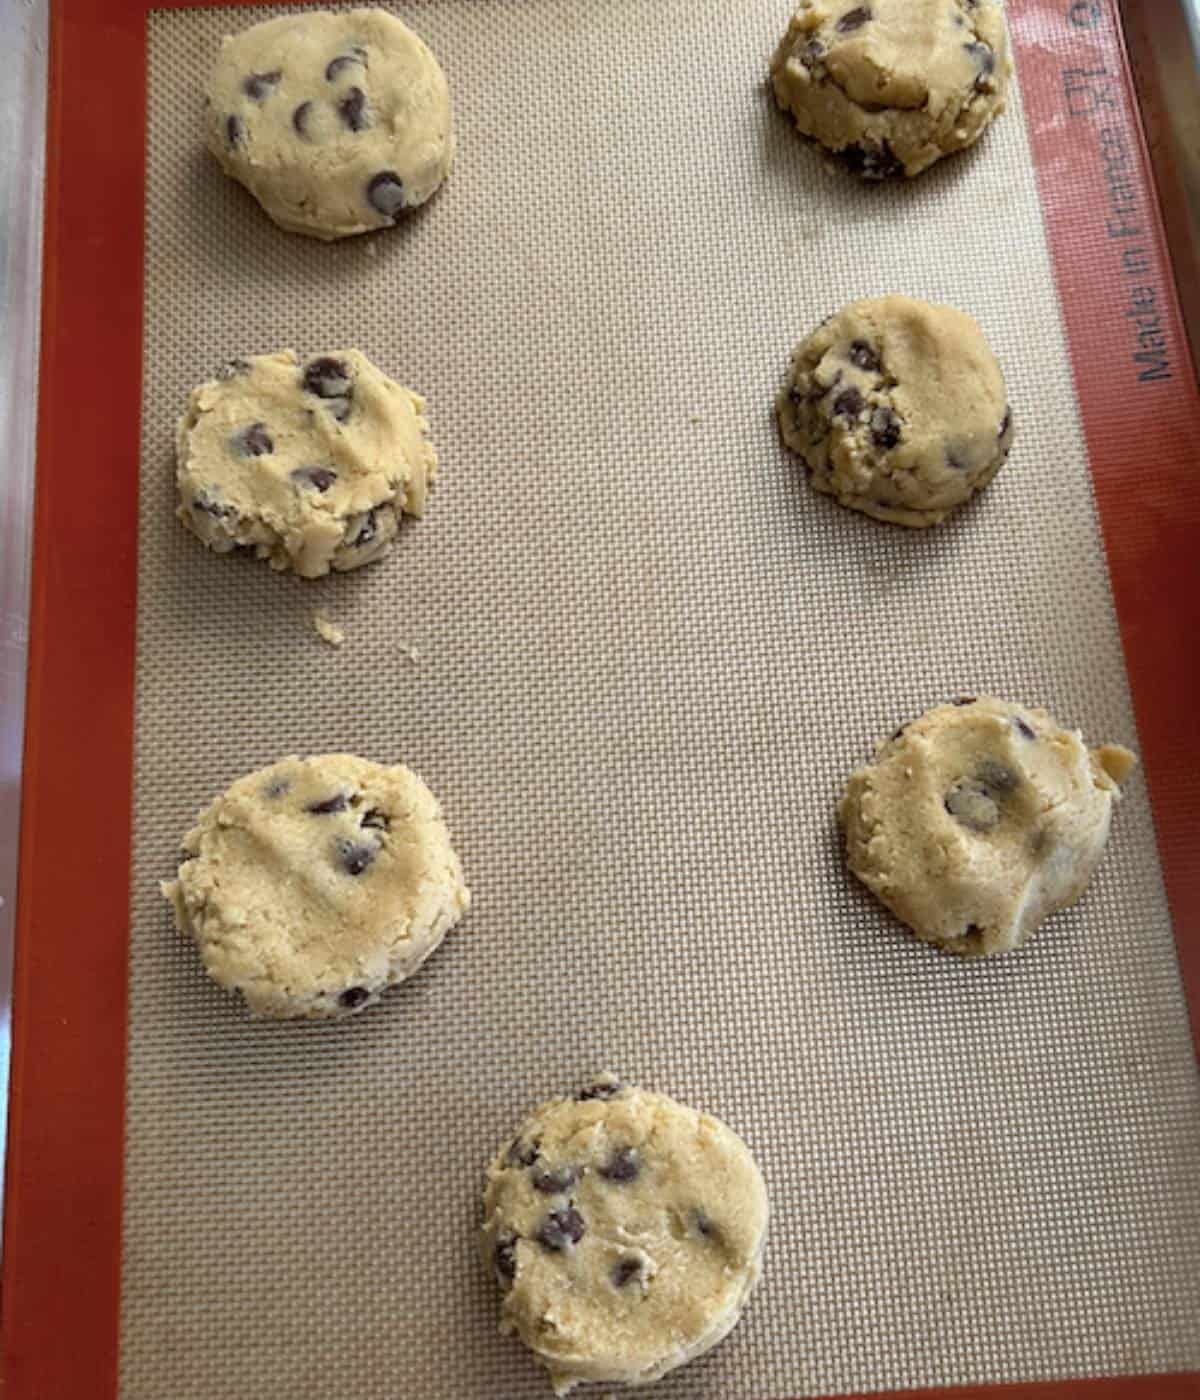 Chocolate chip cookies ready to bake on silpat lined cookie sheet.